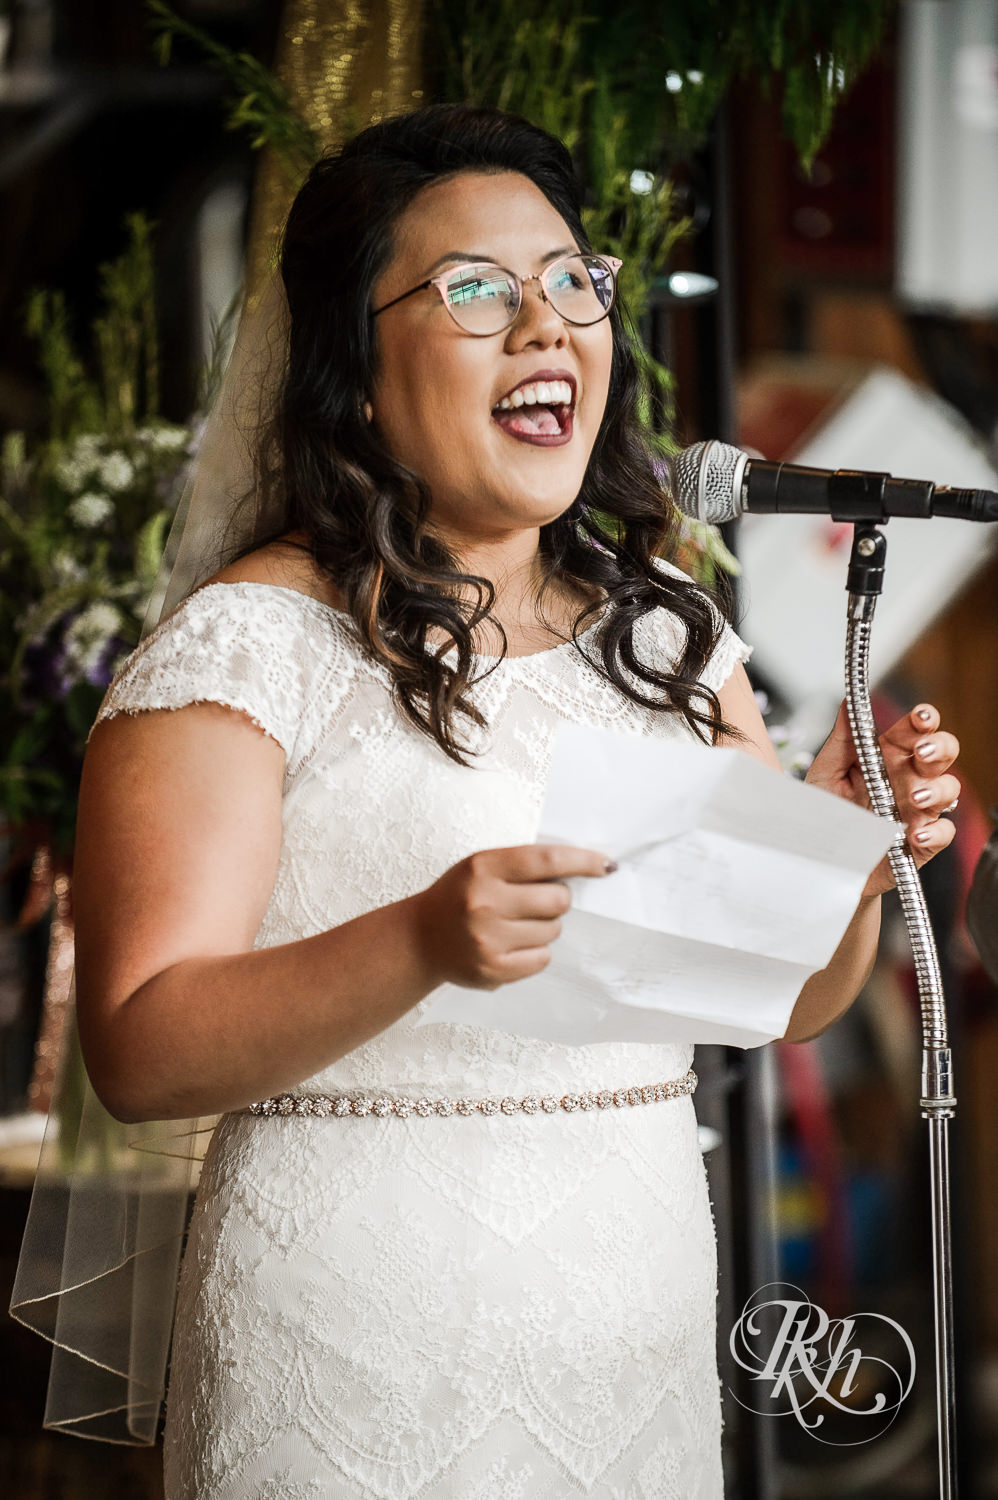 Asian bride with glasses and groom read vows during wedding ceremony at 612 Brew in Minneapolis, Minnesota.